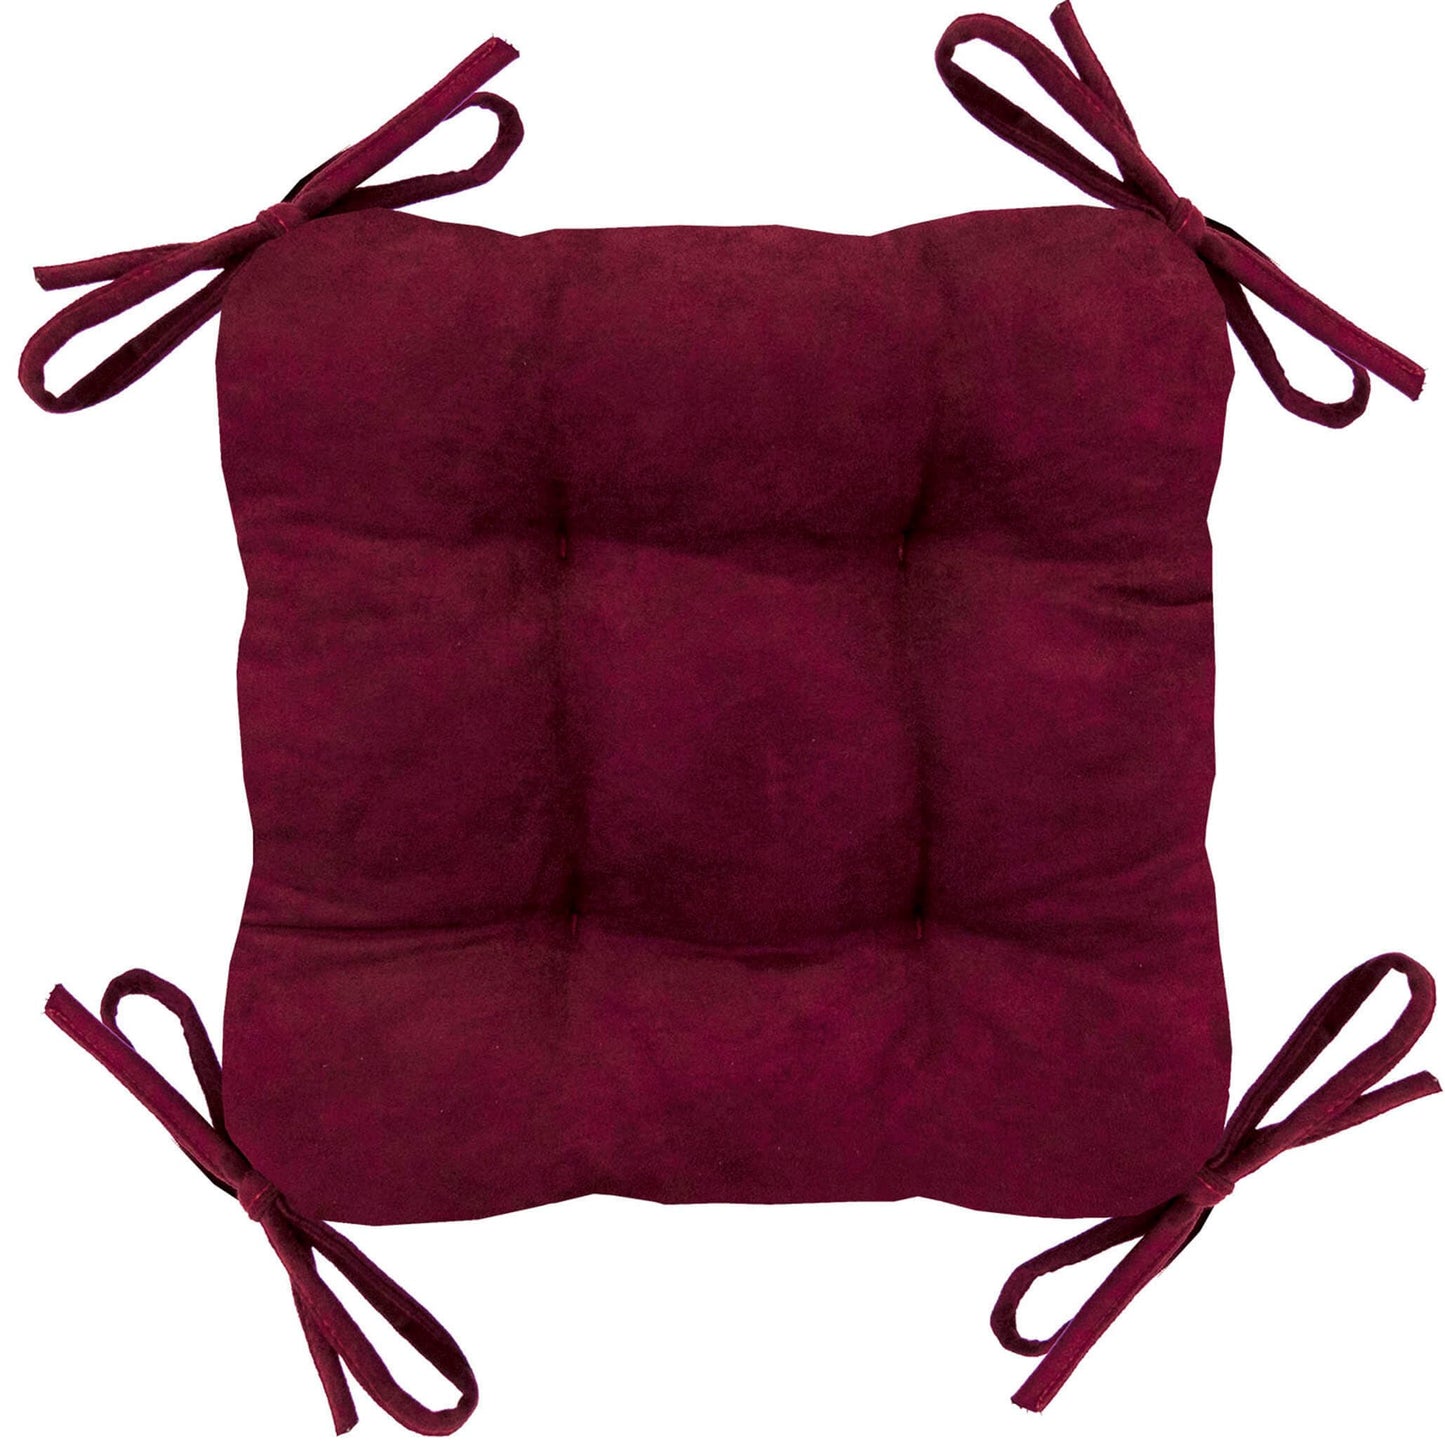 Micro-suede Claret Red Square Industrial Bar Stool Cushion - Latex Foam Fill - Barnett Home Decor - Wine Red